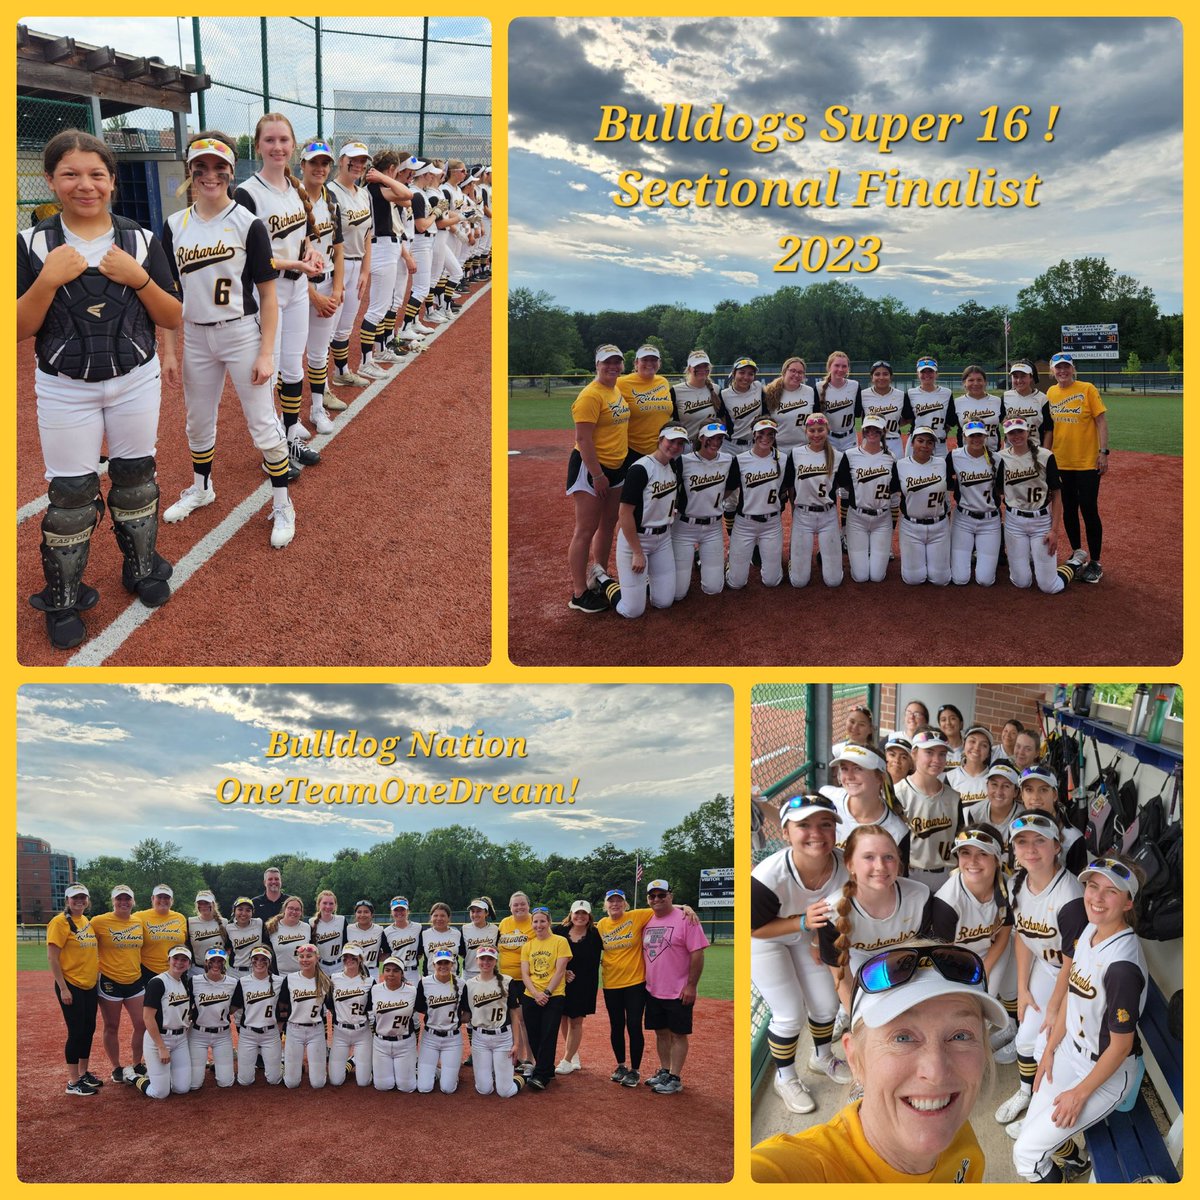 Congrats to our Bulldogs on their amazing 2-1 Sectional semi-final win over the talented Mustangs!! Thanks for turning out Bulldog Nation!! 🥎🎆🥊🐾💛#nonebetter #oneteamonedream #playersplayTEAMSwin